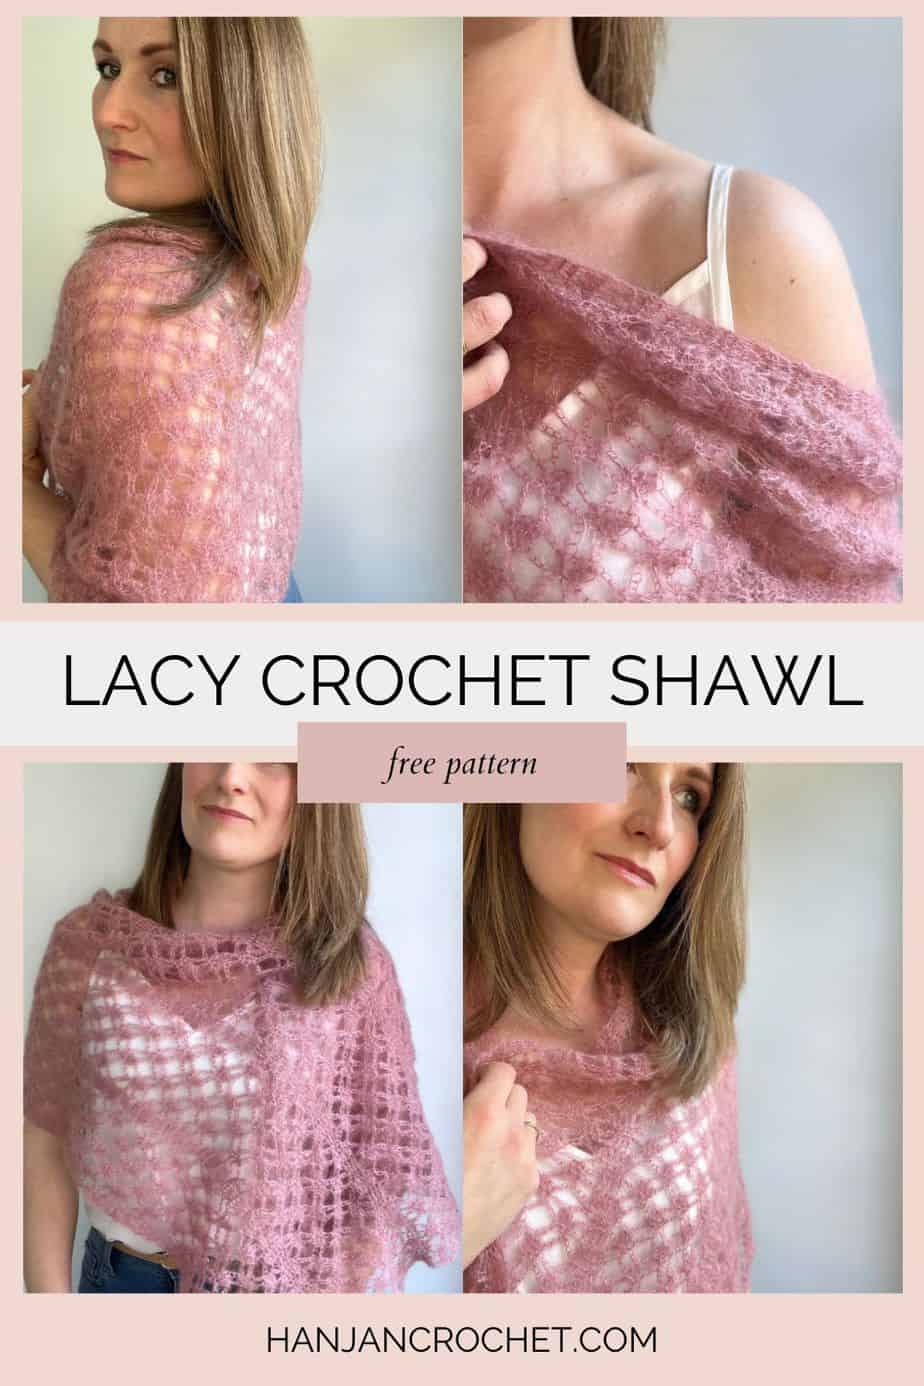 four images showing woman wearing lacy mohair crochet shawl 